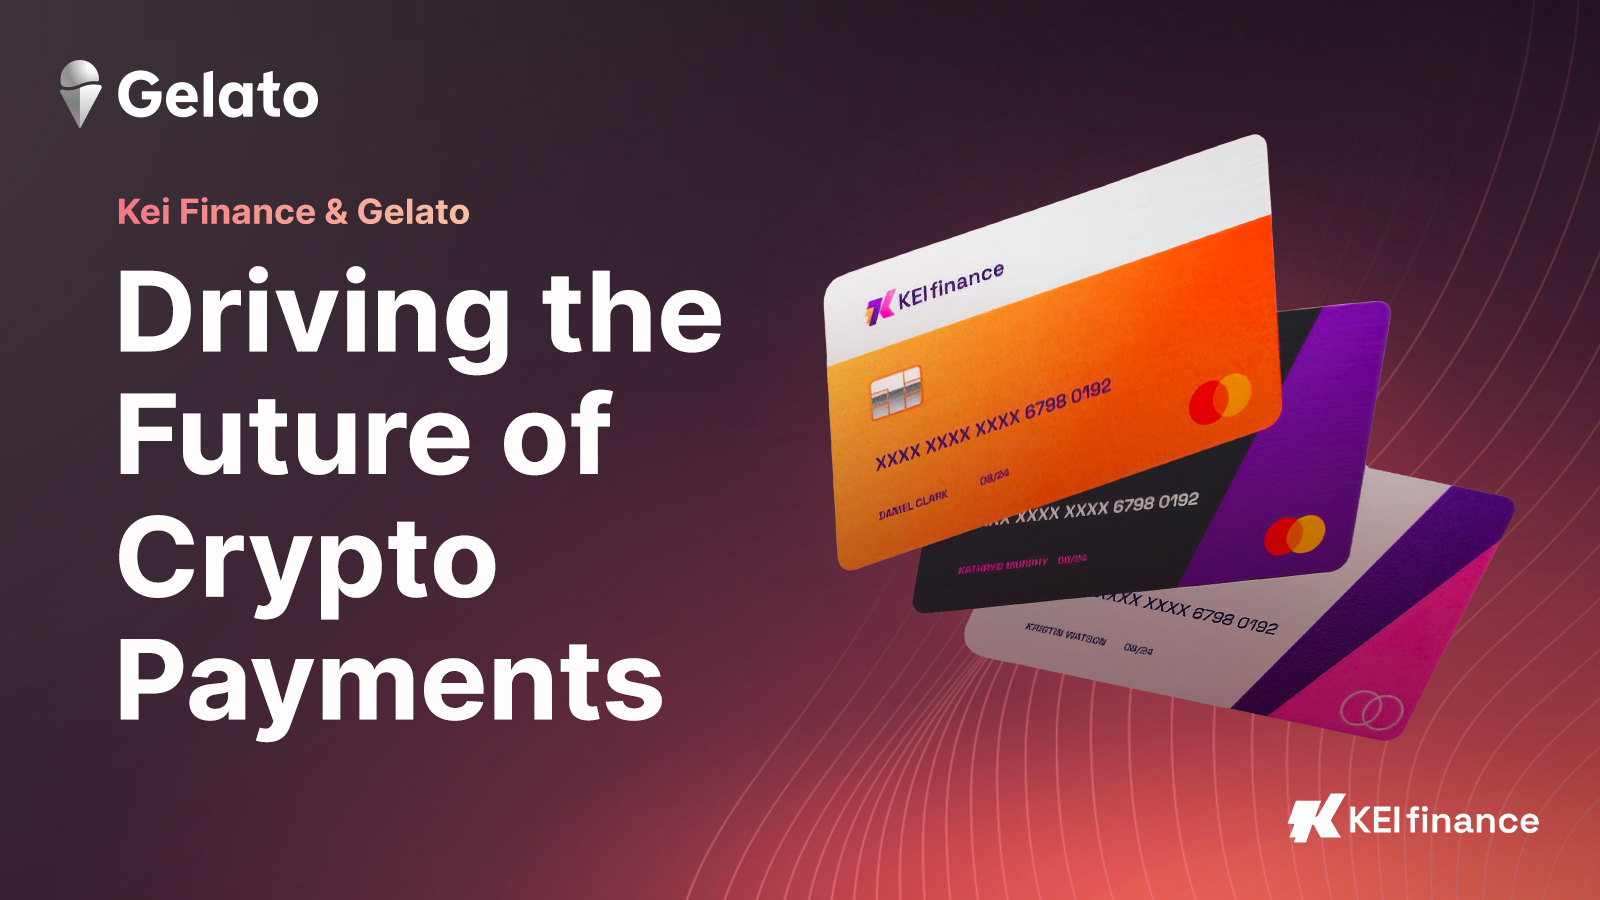 KEI Finance & Gelato: Driving the Future of Crypto Payments